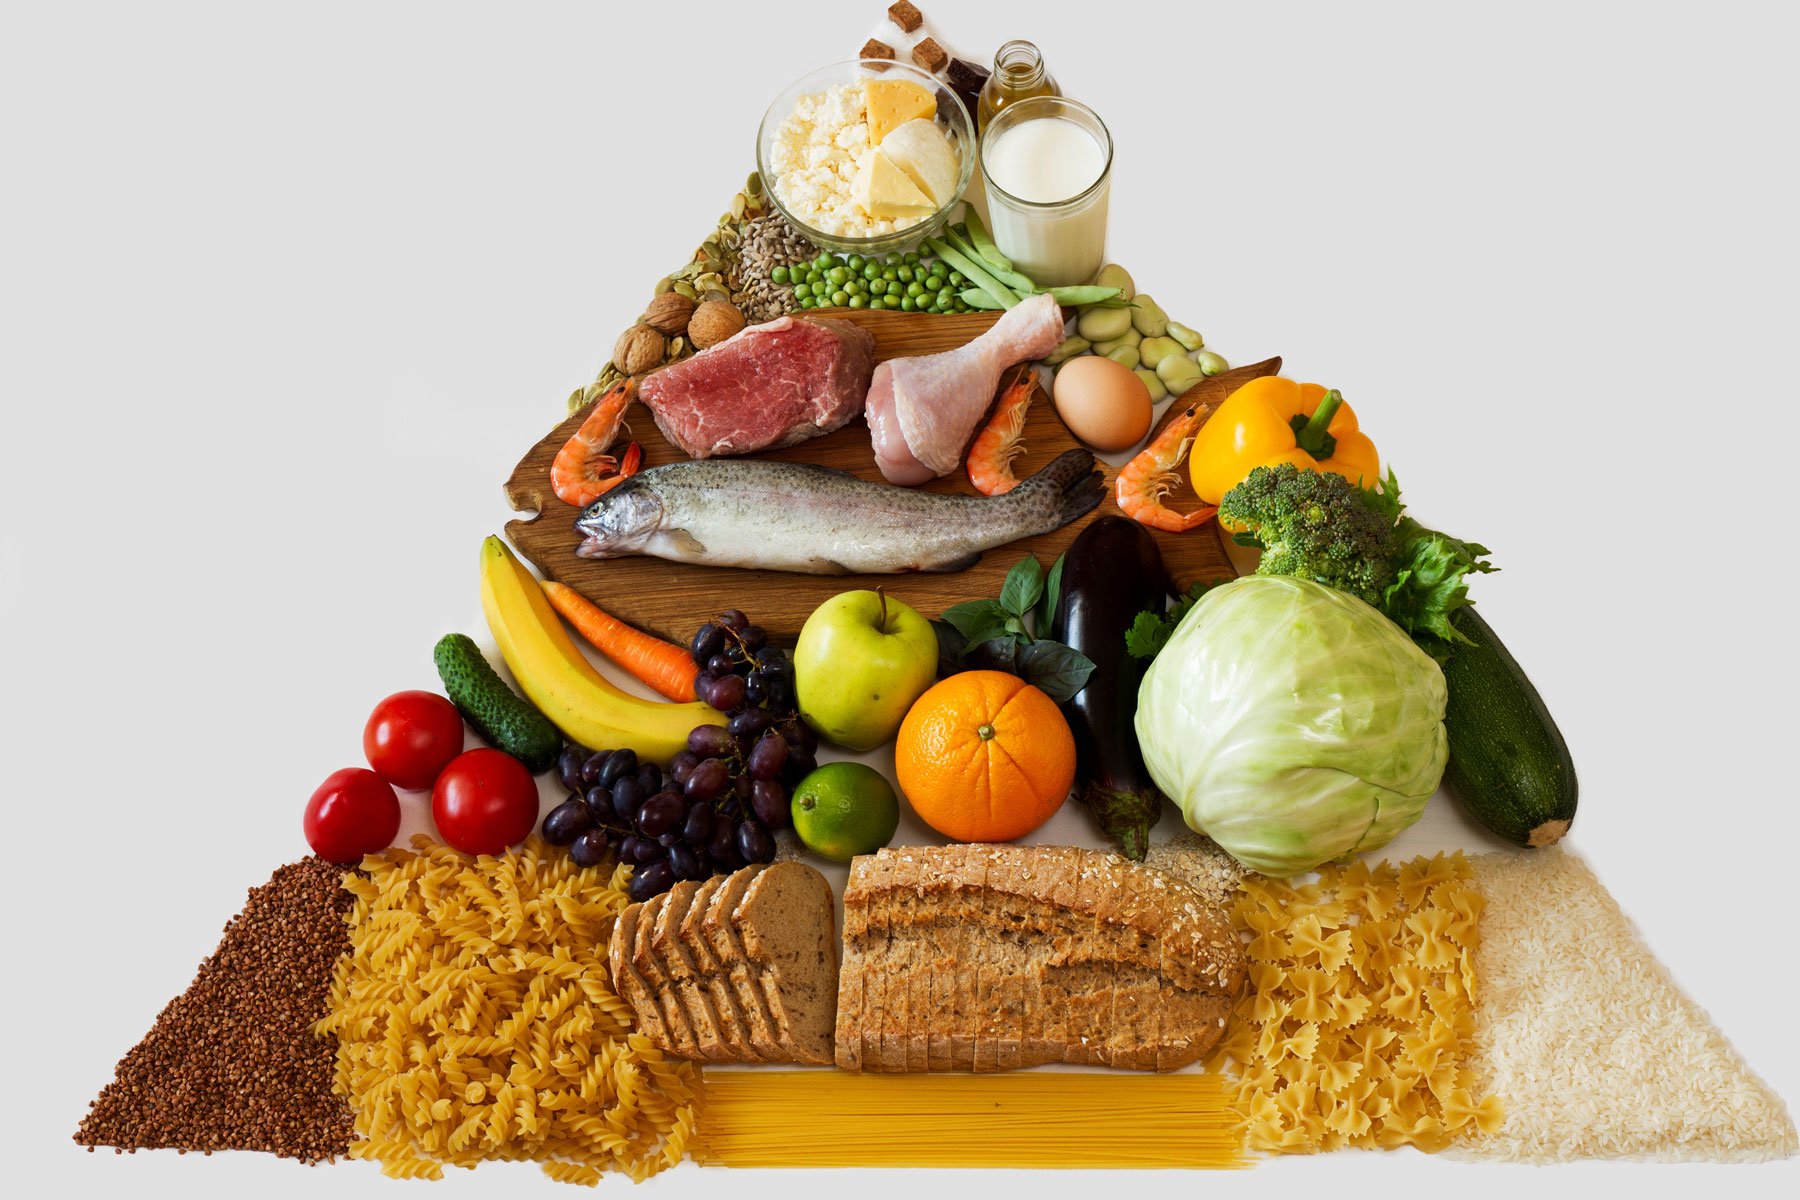 How and why the Food Pyramid diet recommendations changed